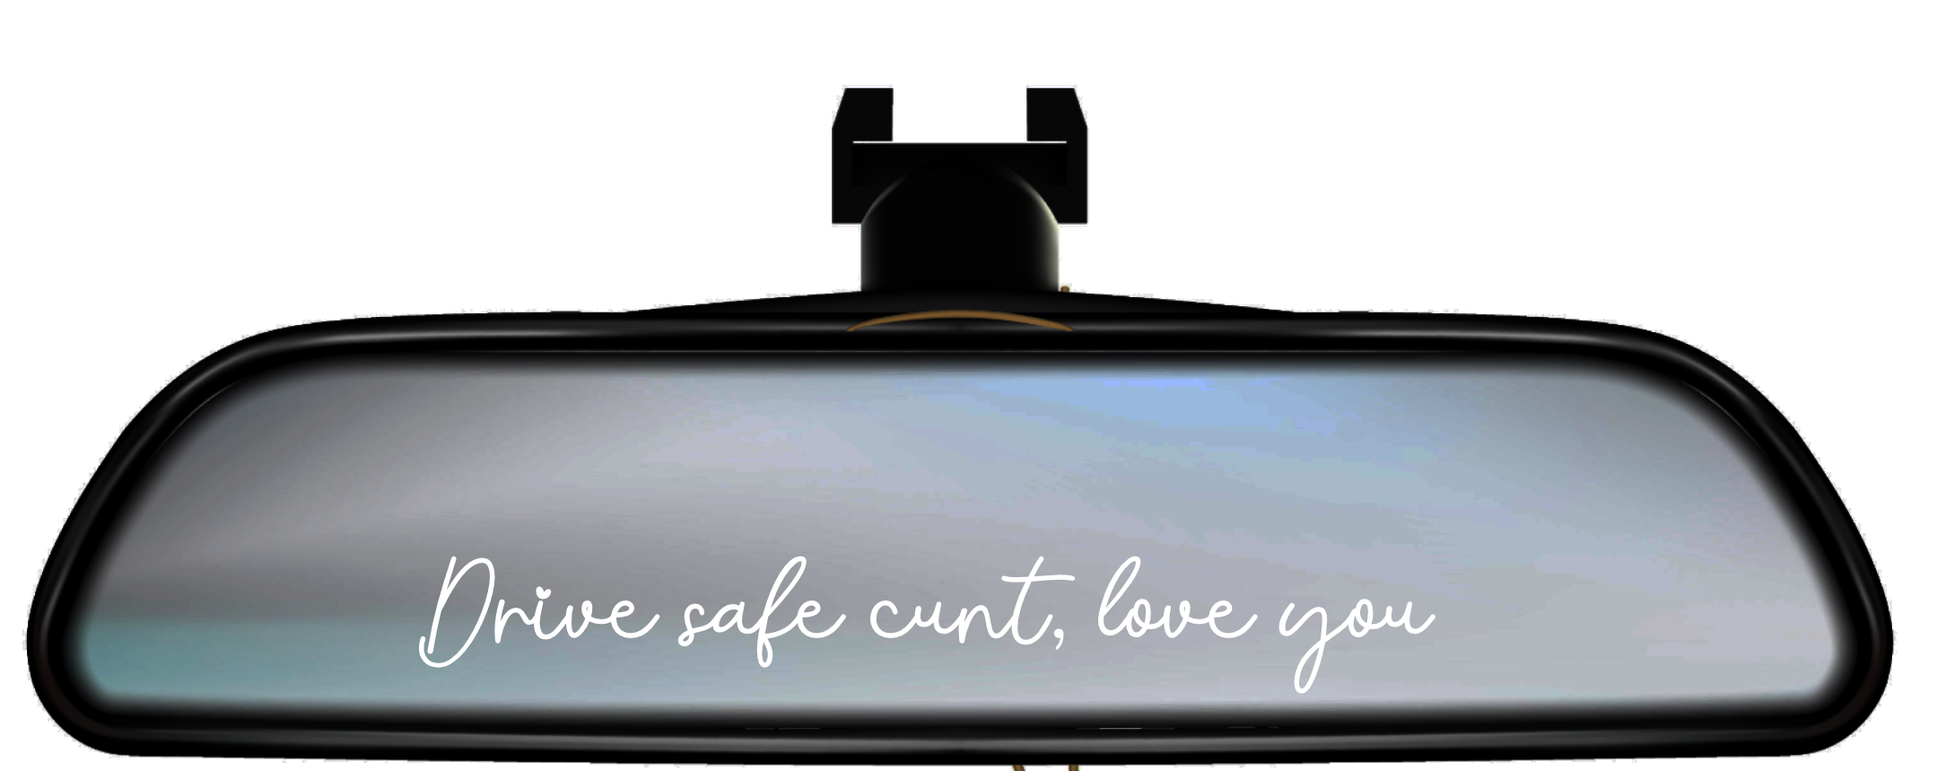 A car interior mirror with a decal sticker to the bottom which says 'drive safe c*nt, love you' in white.